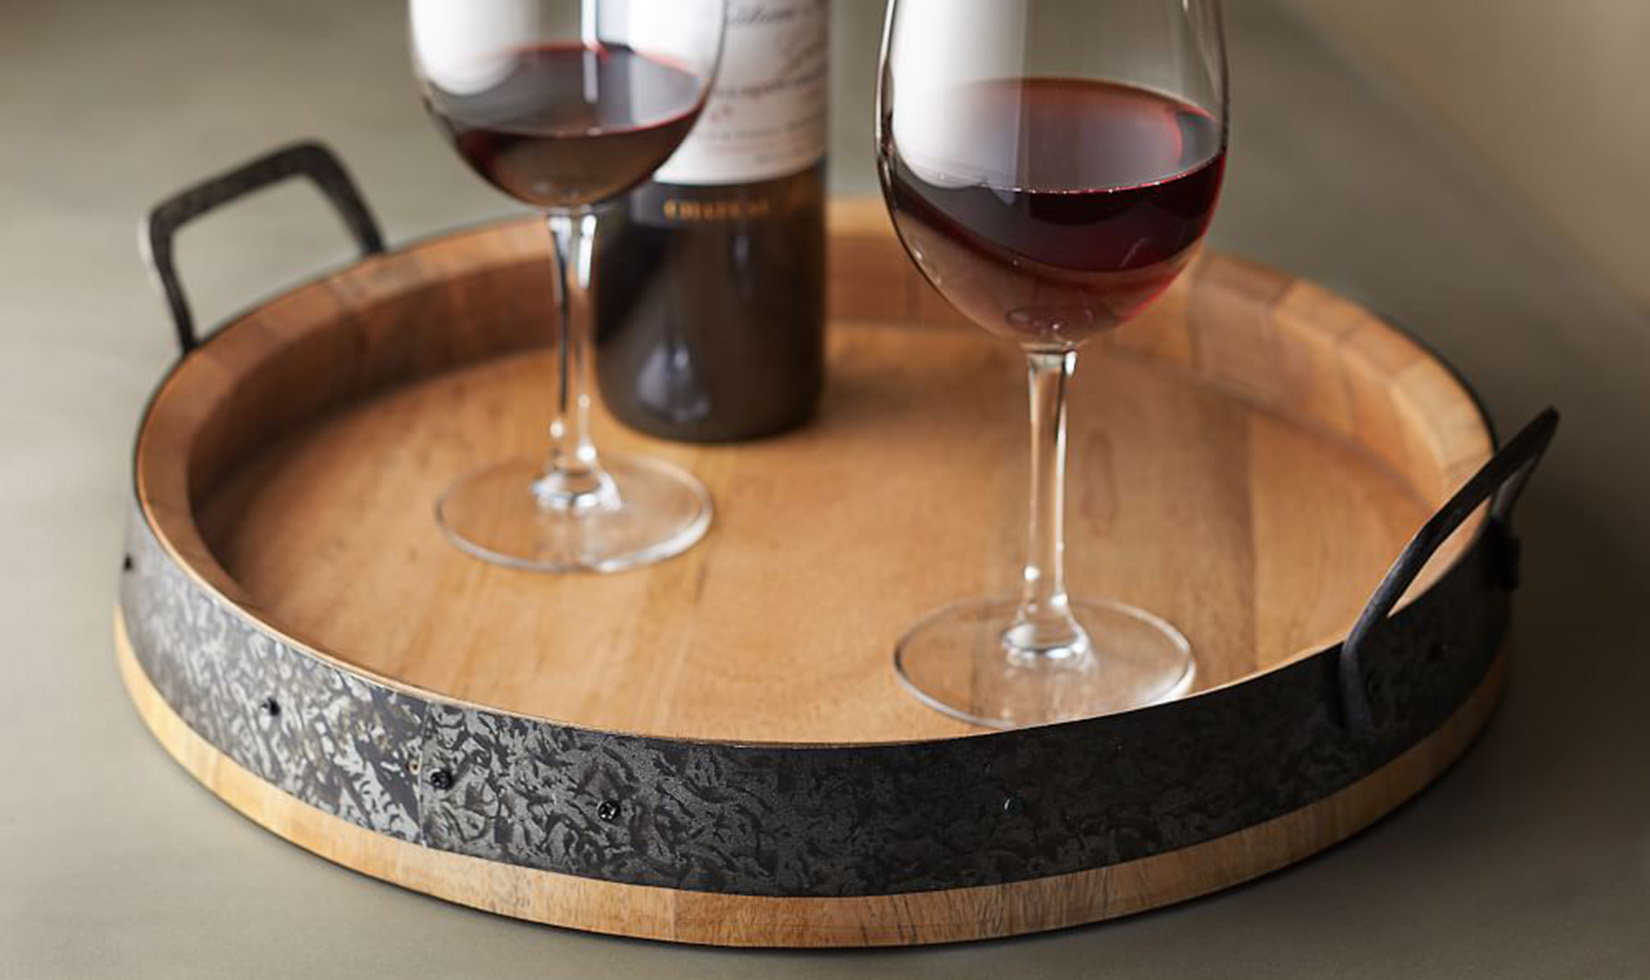 stemmed glasses with red wine on barrel top serving tray